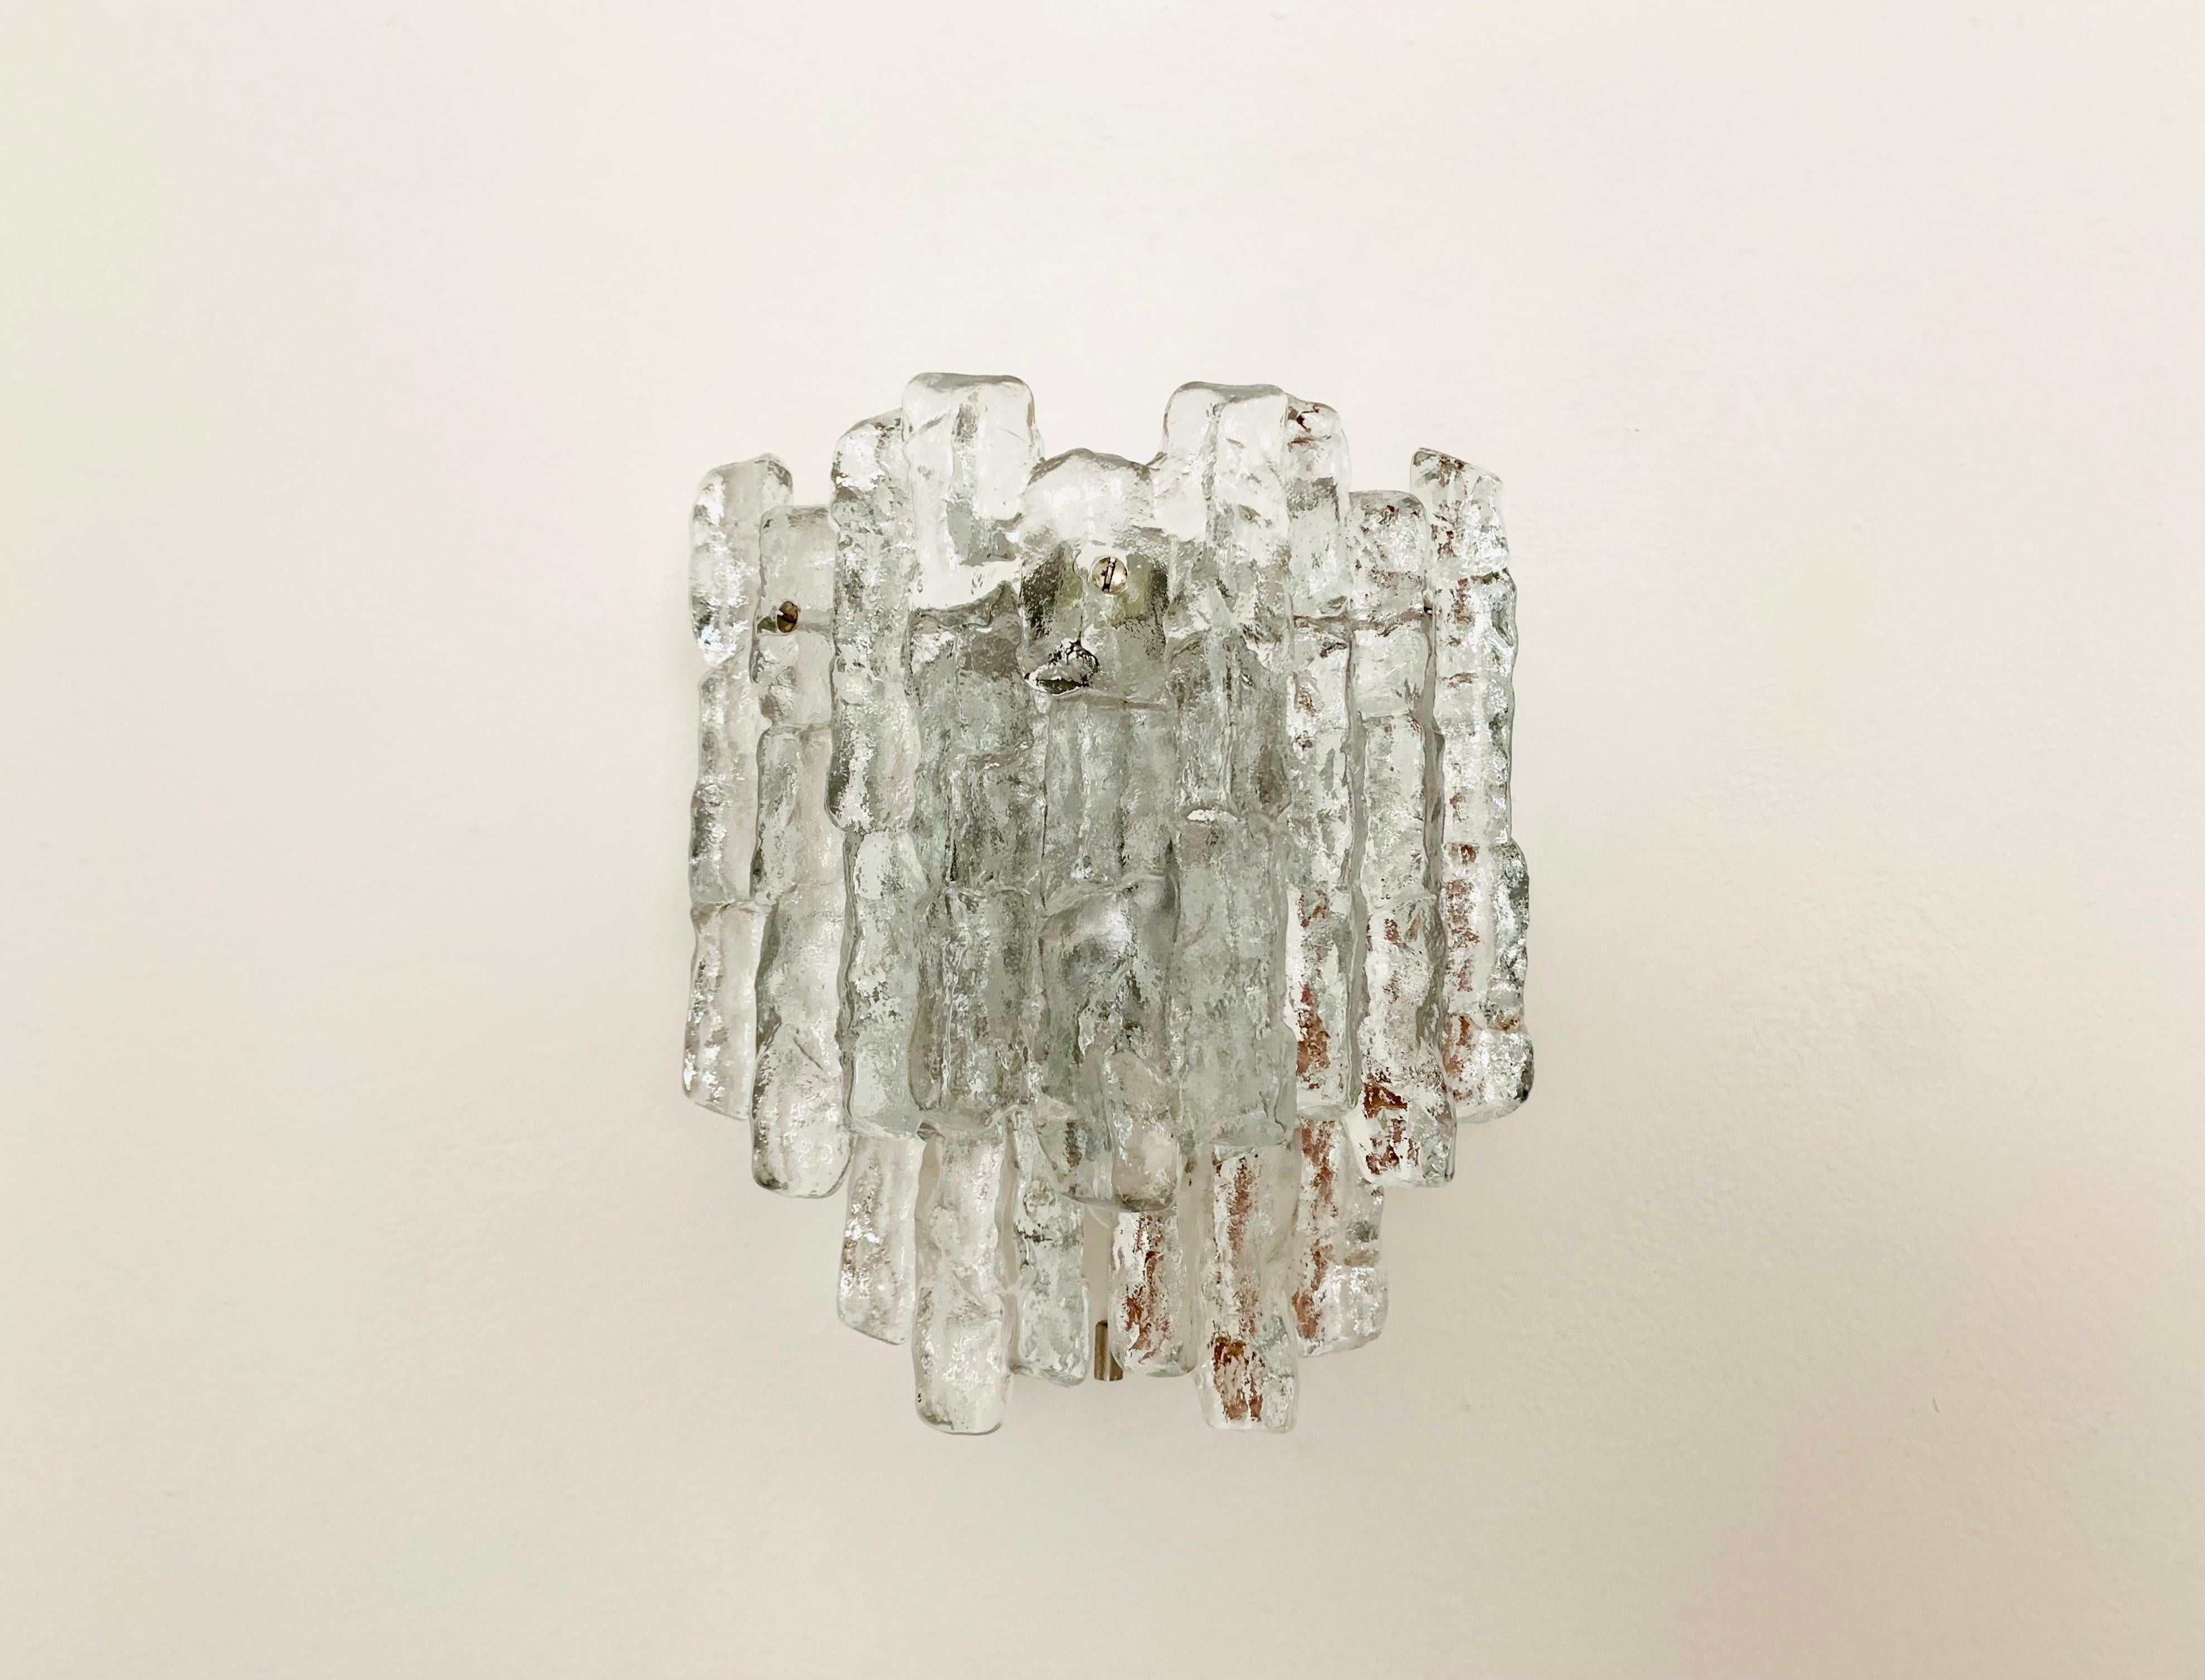 Very nice ice glass wall lamp from the 1960s.
Very pleasant lighting effect thanks to the ice glass, which spreads an elegant, sparkling play of light in the room.
Great design and high-quality workmanship.

Manufacturer: Franken KG
Design: J.T.